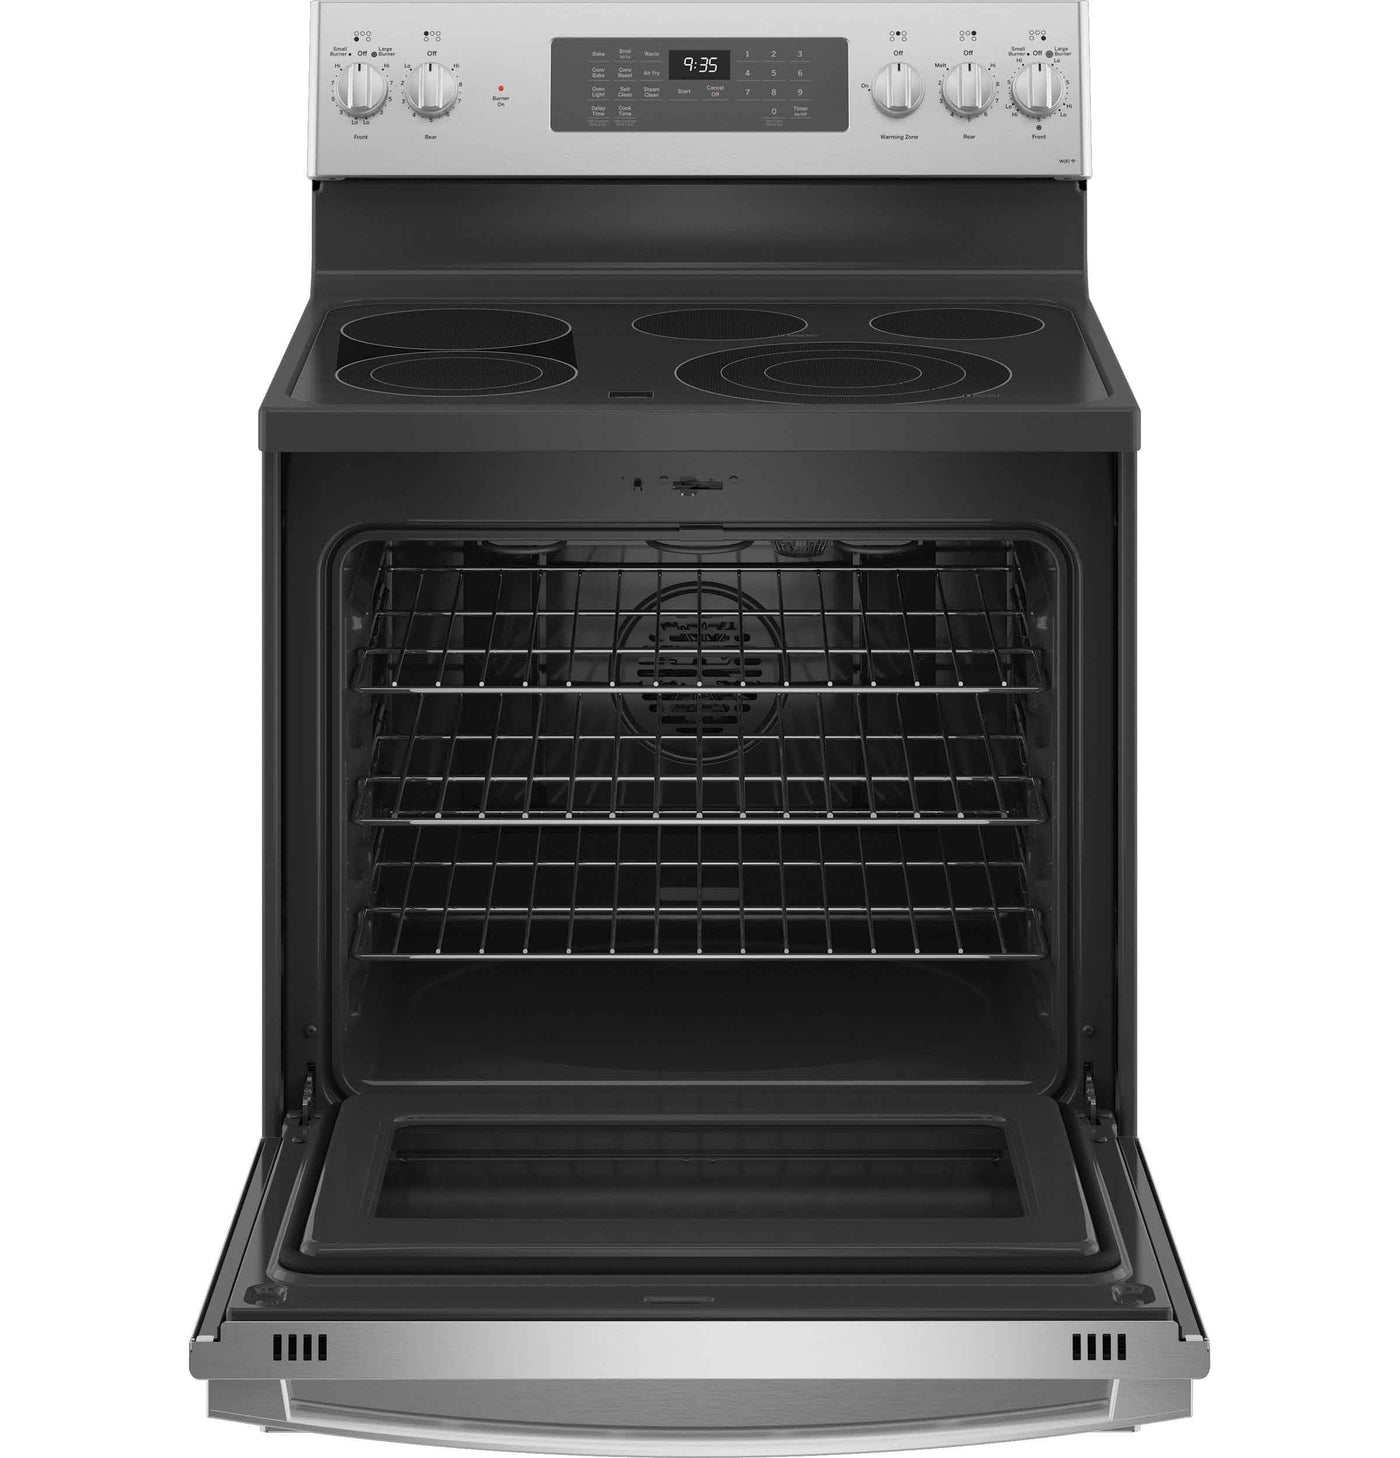 GE Profile Fingerprint Resistant Stainless Steel 30" Free Standing Electric Range with Air Fry (5.3 Cu.Ft) - PB935YPFS